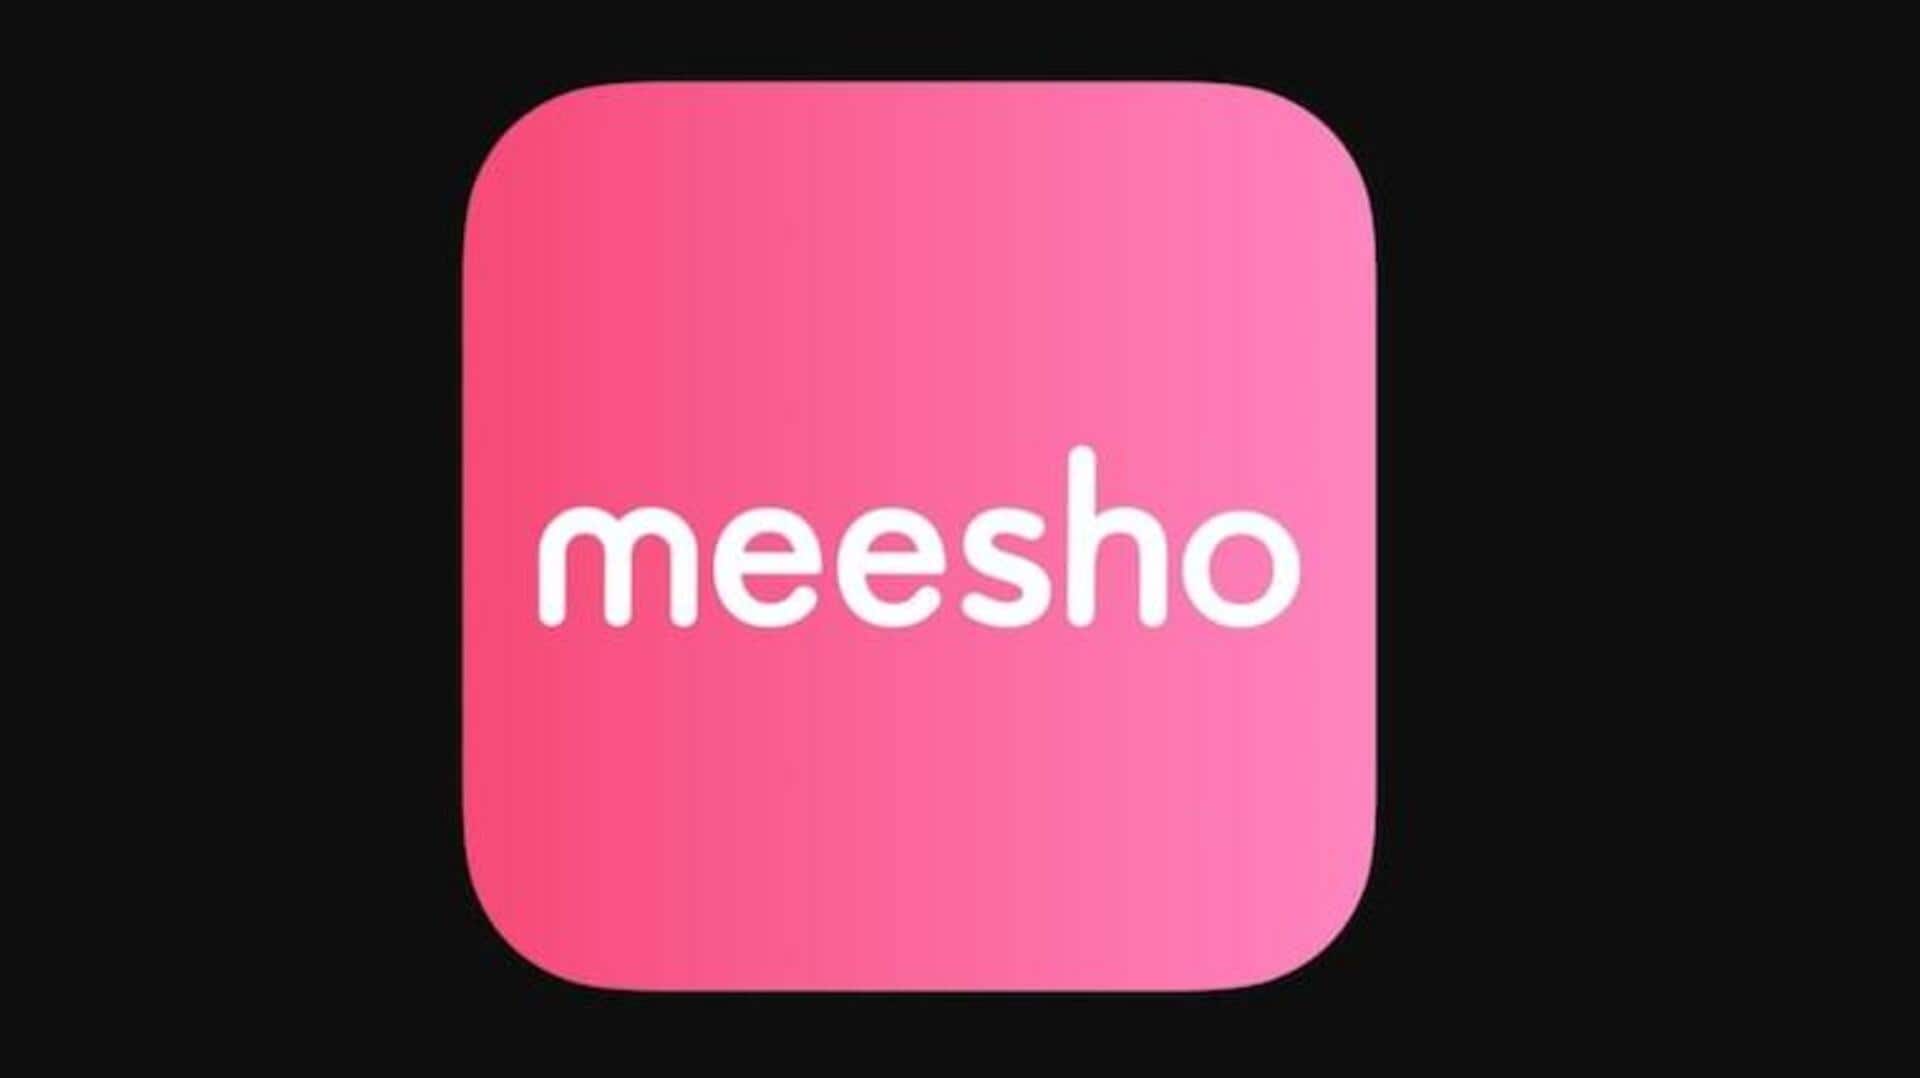 Meesho could launch IPO in 12-18 months